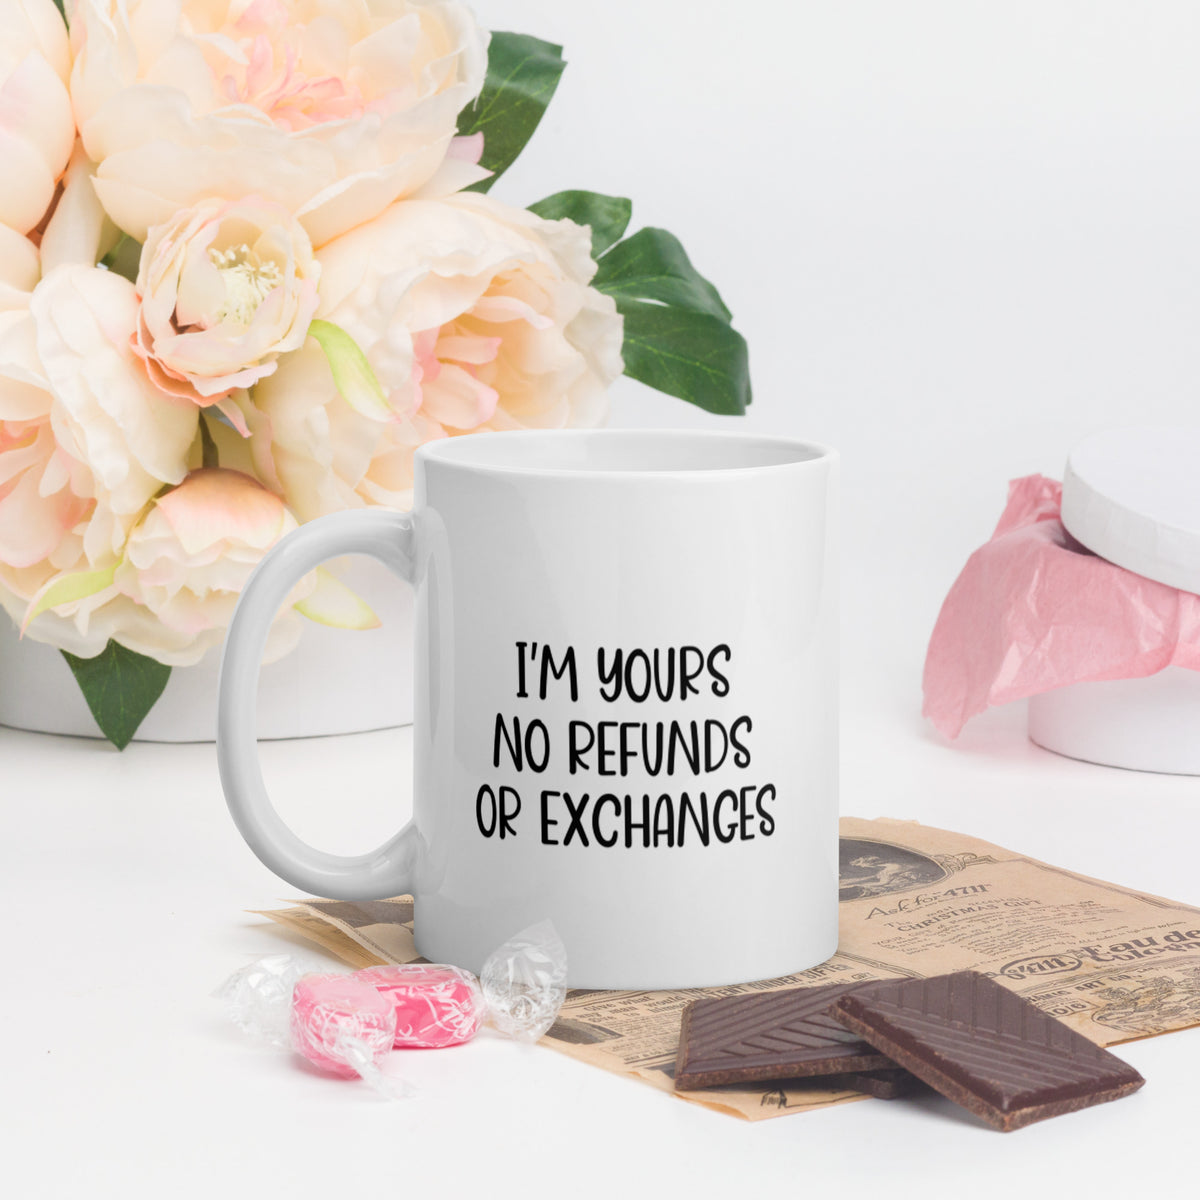 I'm Yours No Refunds Or Exchanges White Mug